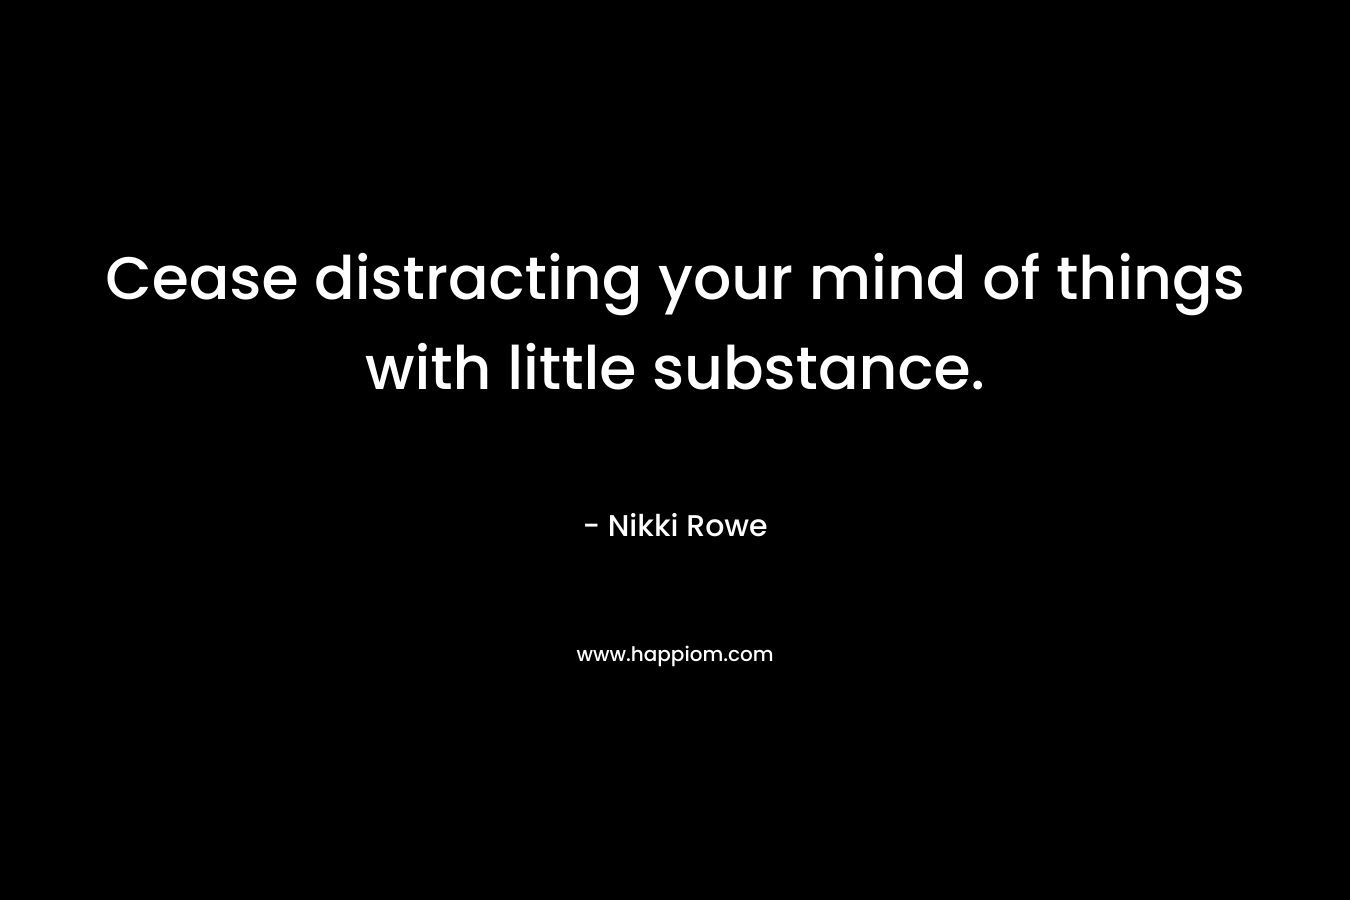 Cease distracting your mind of things with little substance. – Nikki Rowe